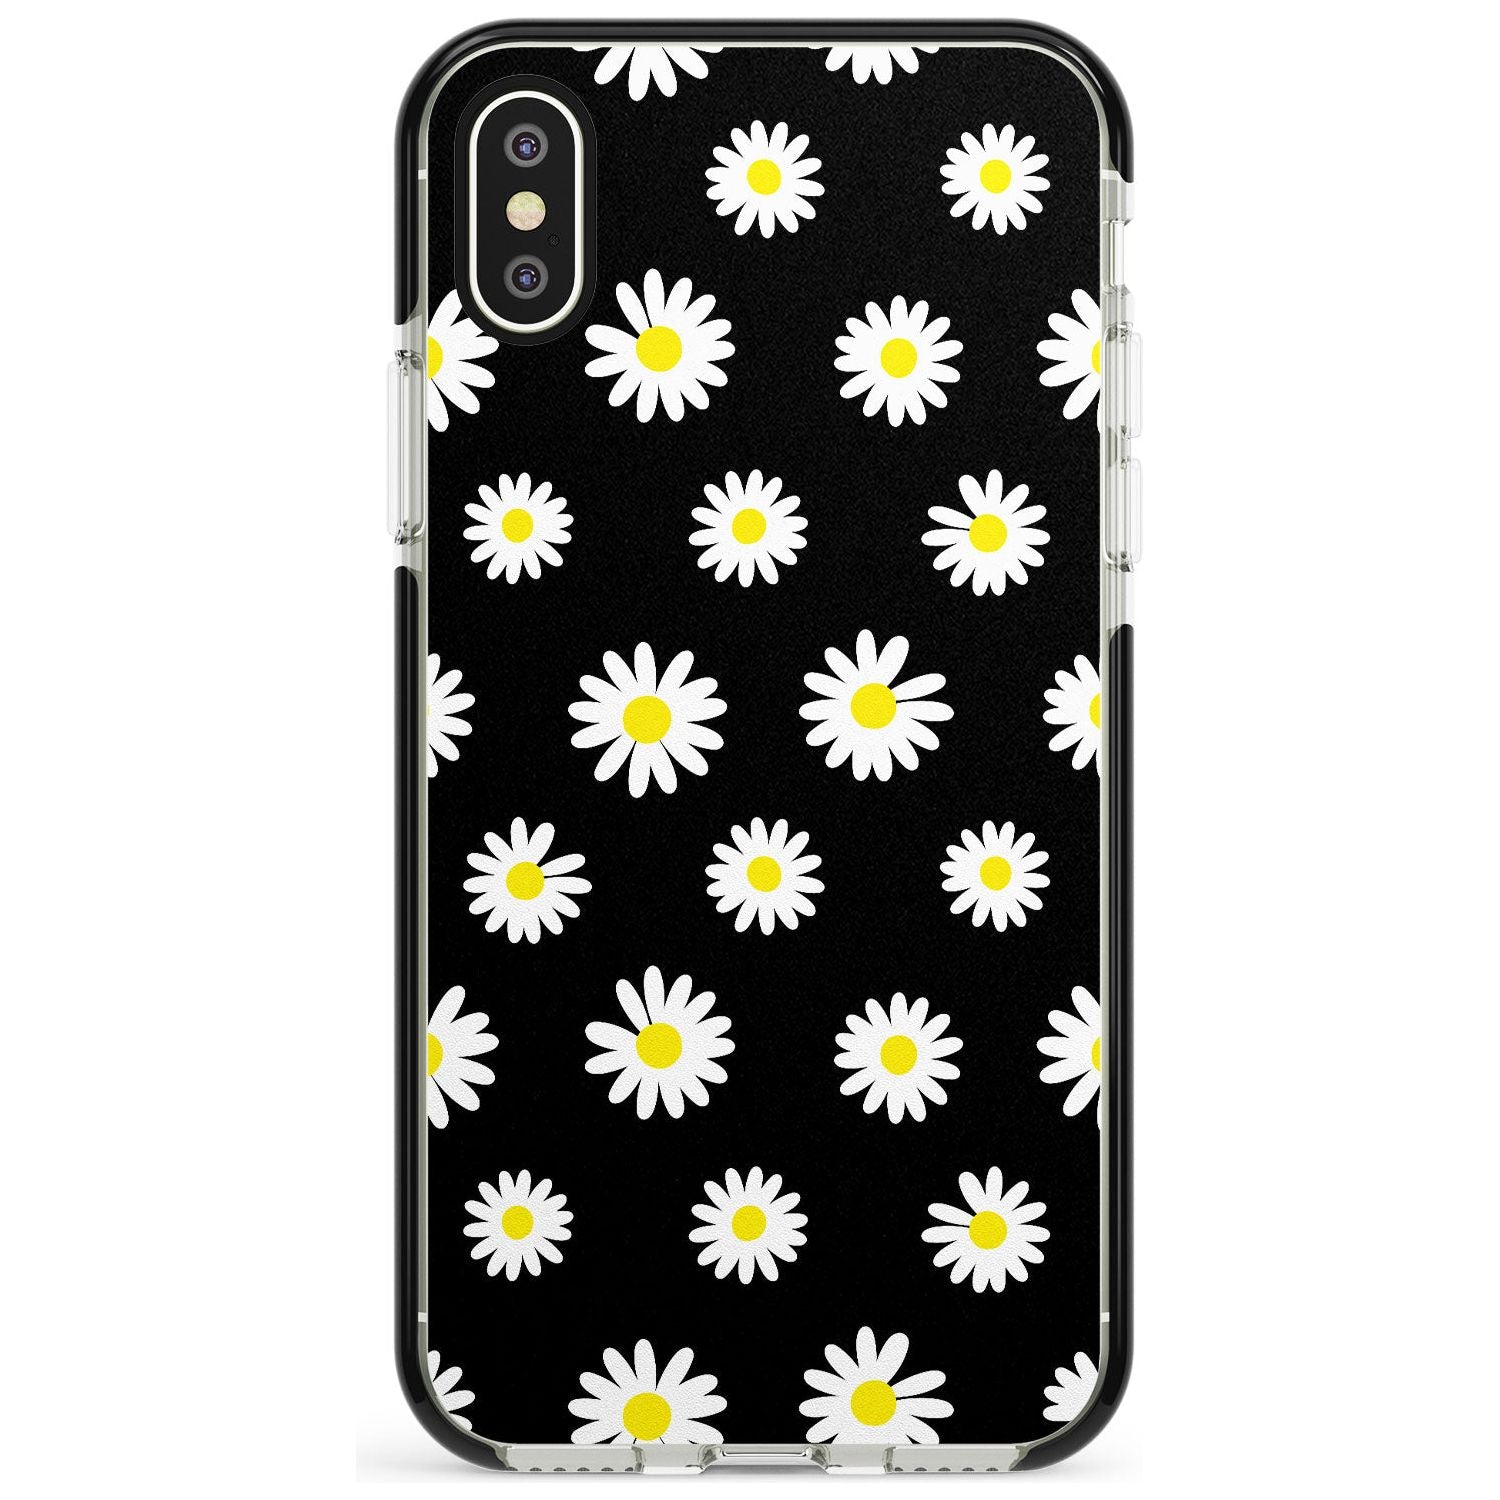 White Daisy Pattern (Black) Black Impact Phone Case for iPhone X XS Max XR